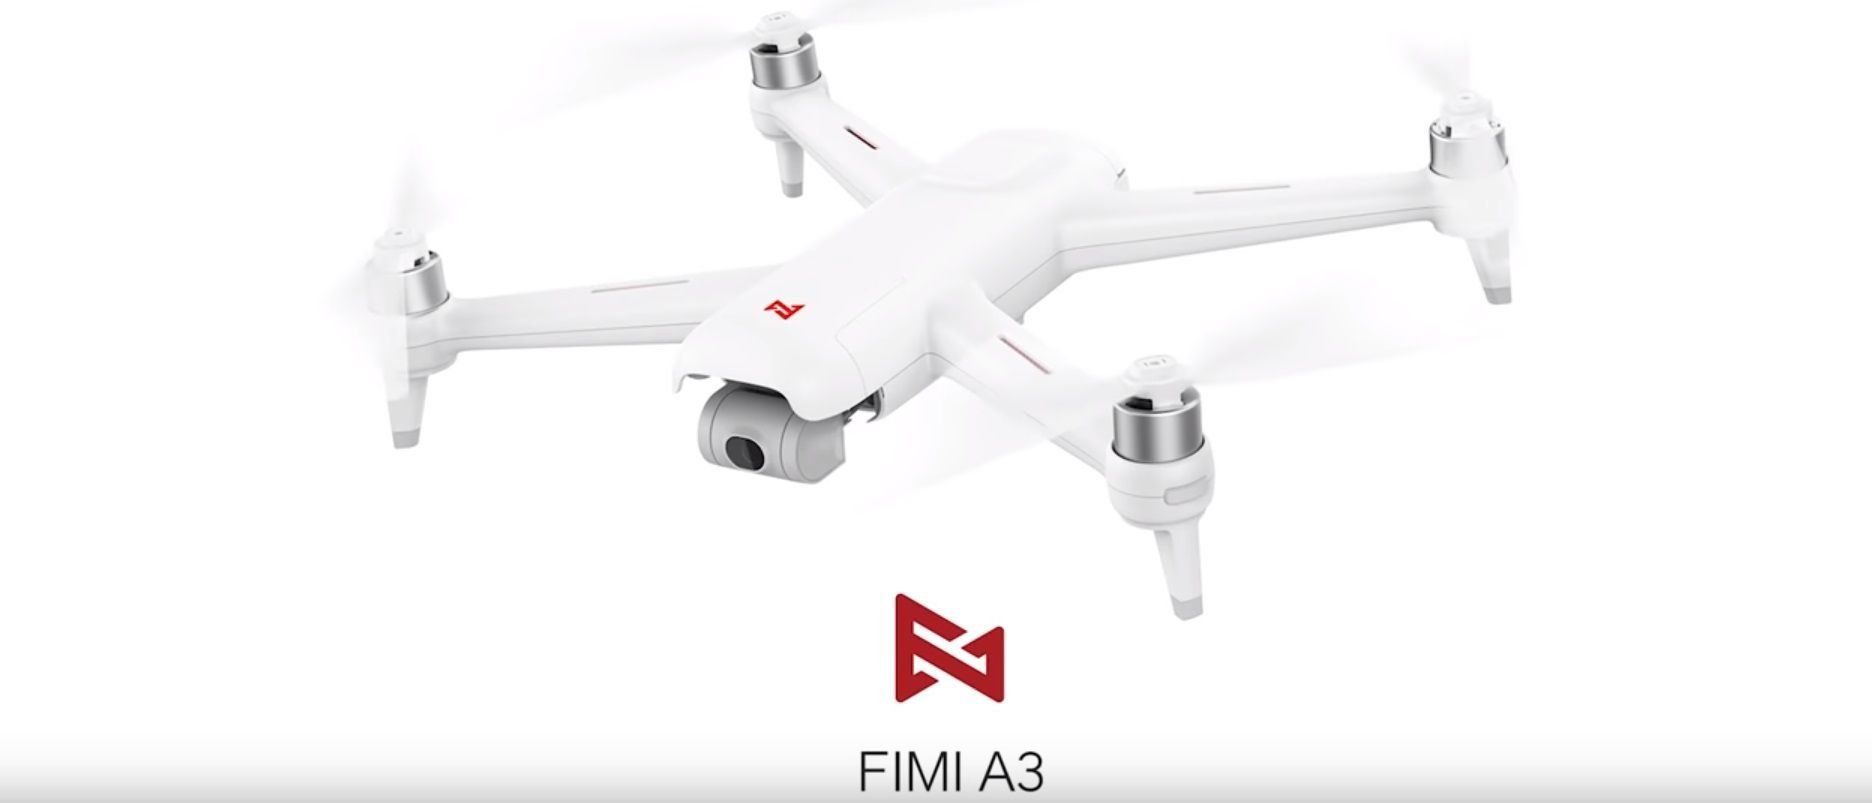 Xiaomi FIMI A3 quadrocopter review with advantages and disadvantages